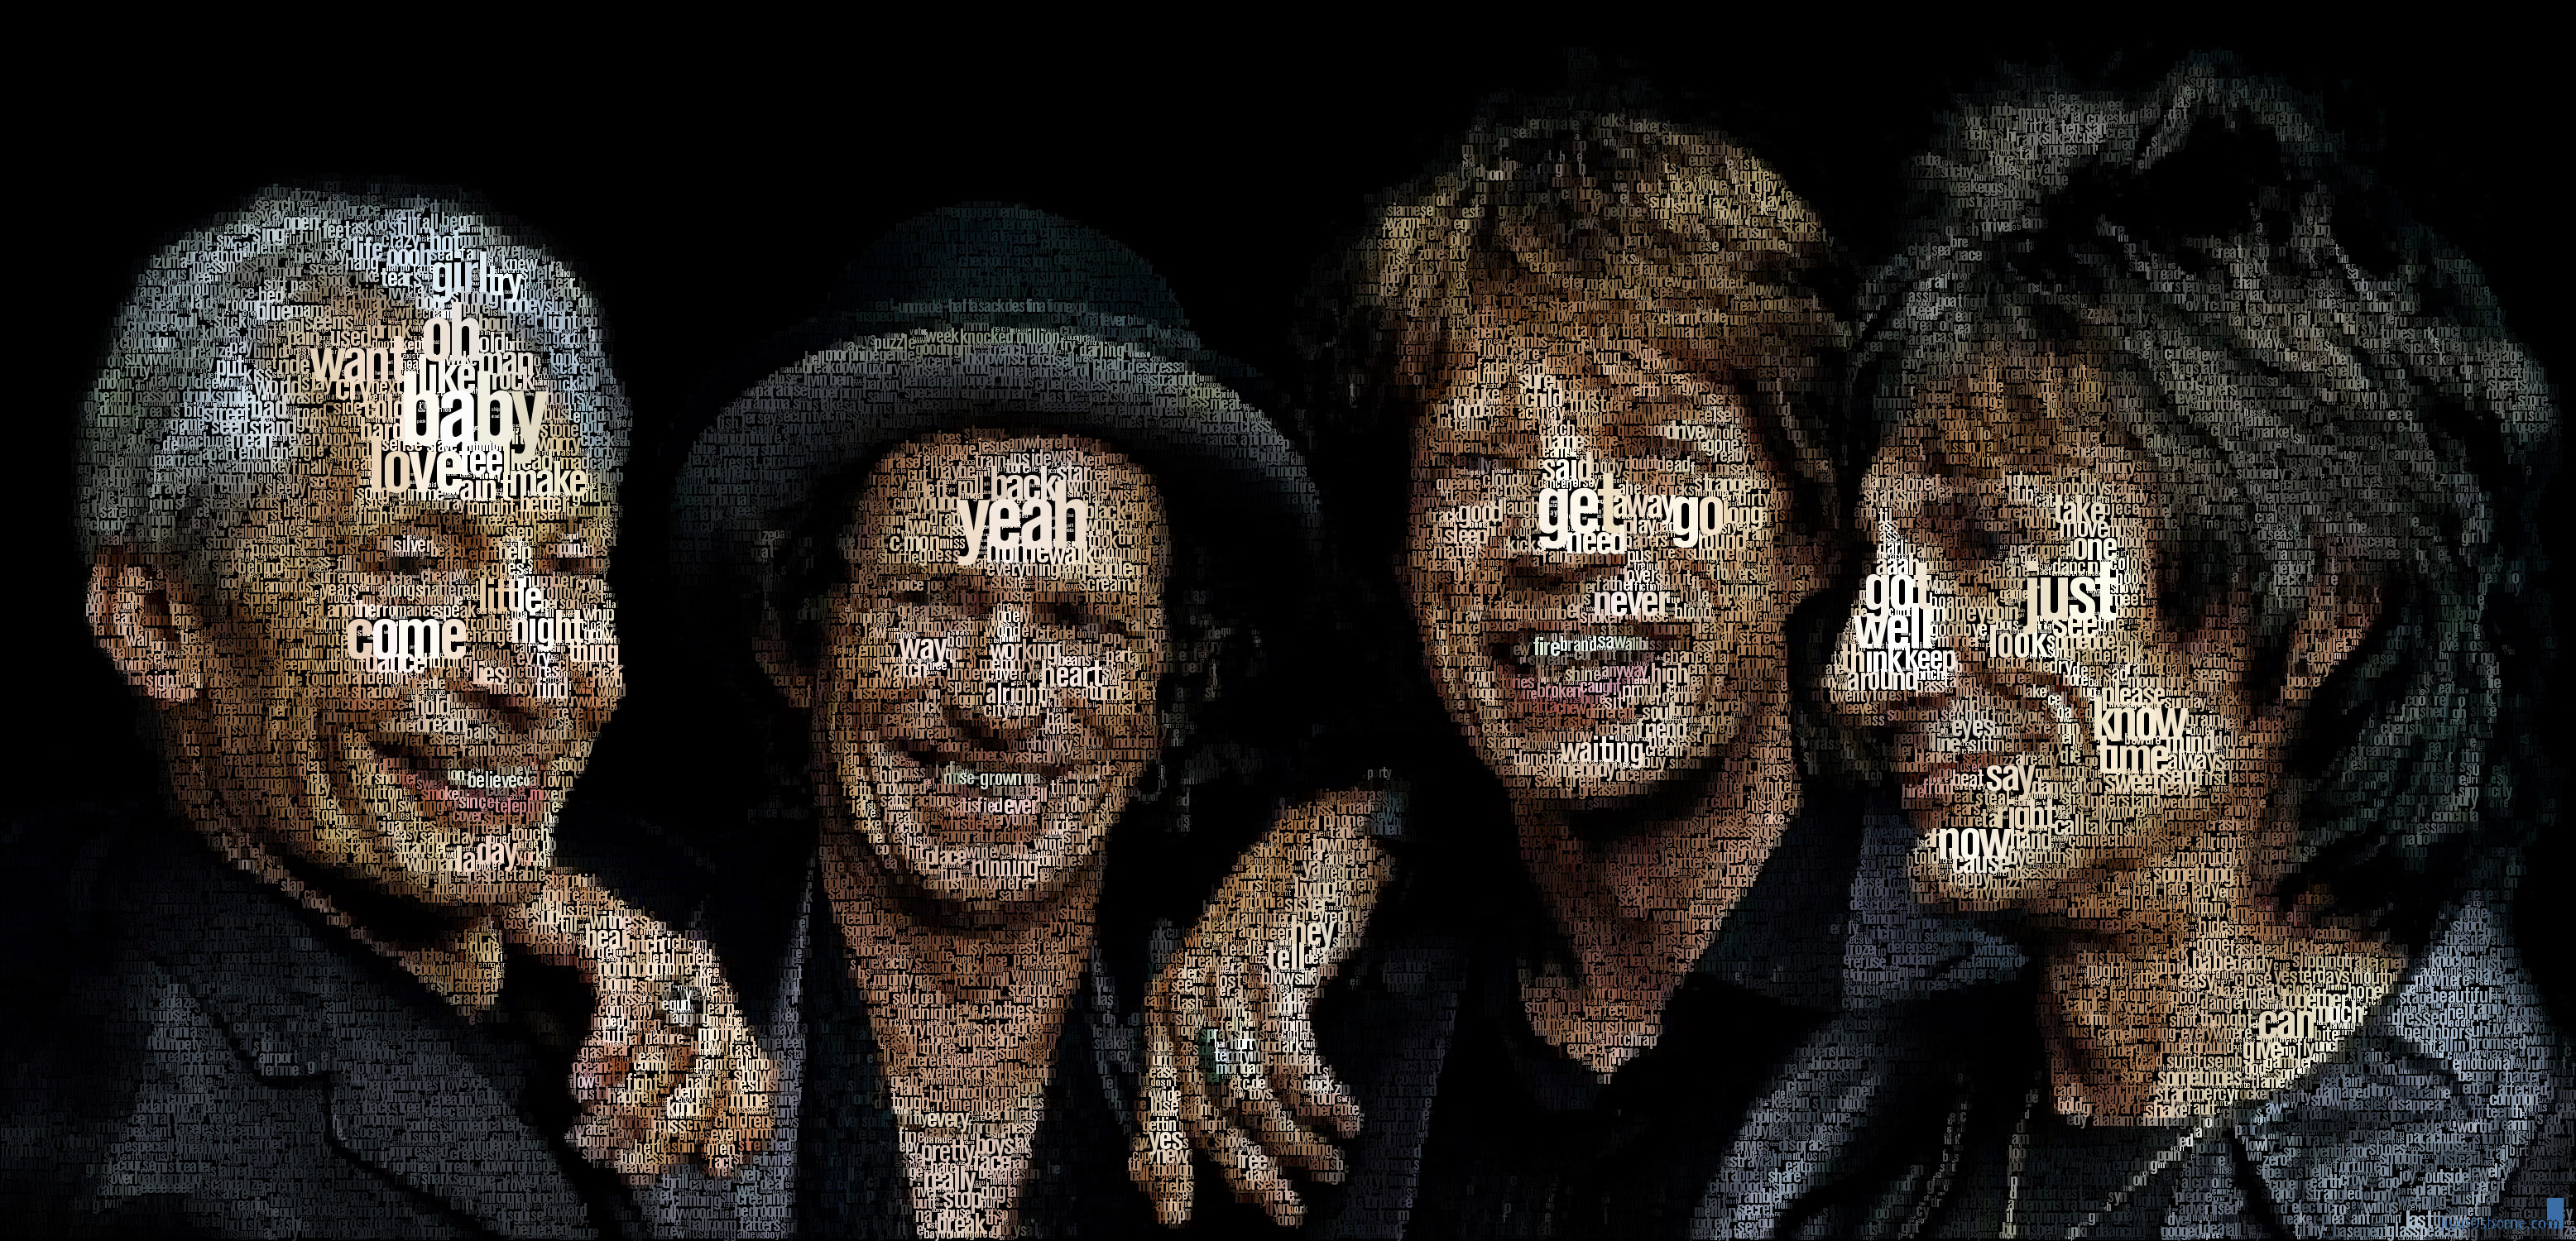 Typography Word Clouds Juan Osborne Artwork The Rolling Stones Rock And Roll Rock Bands Mick Jagger  3113x1500